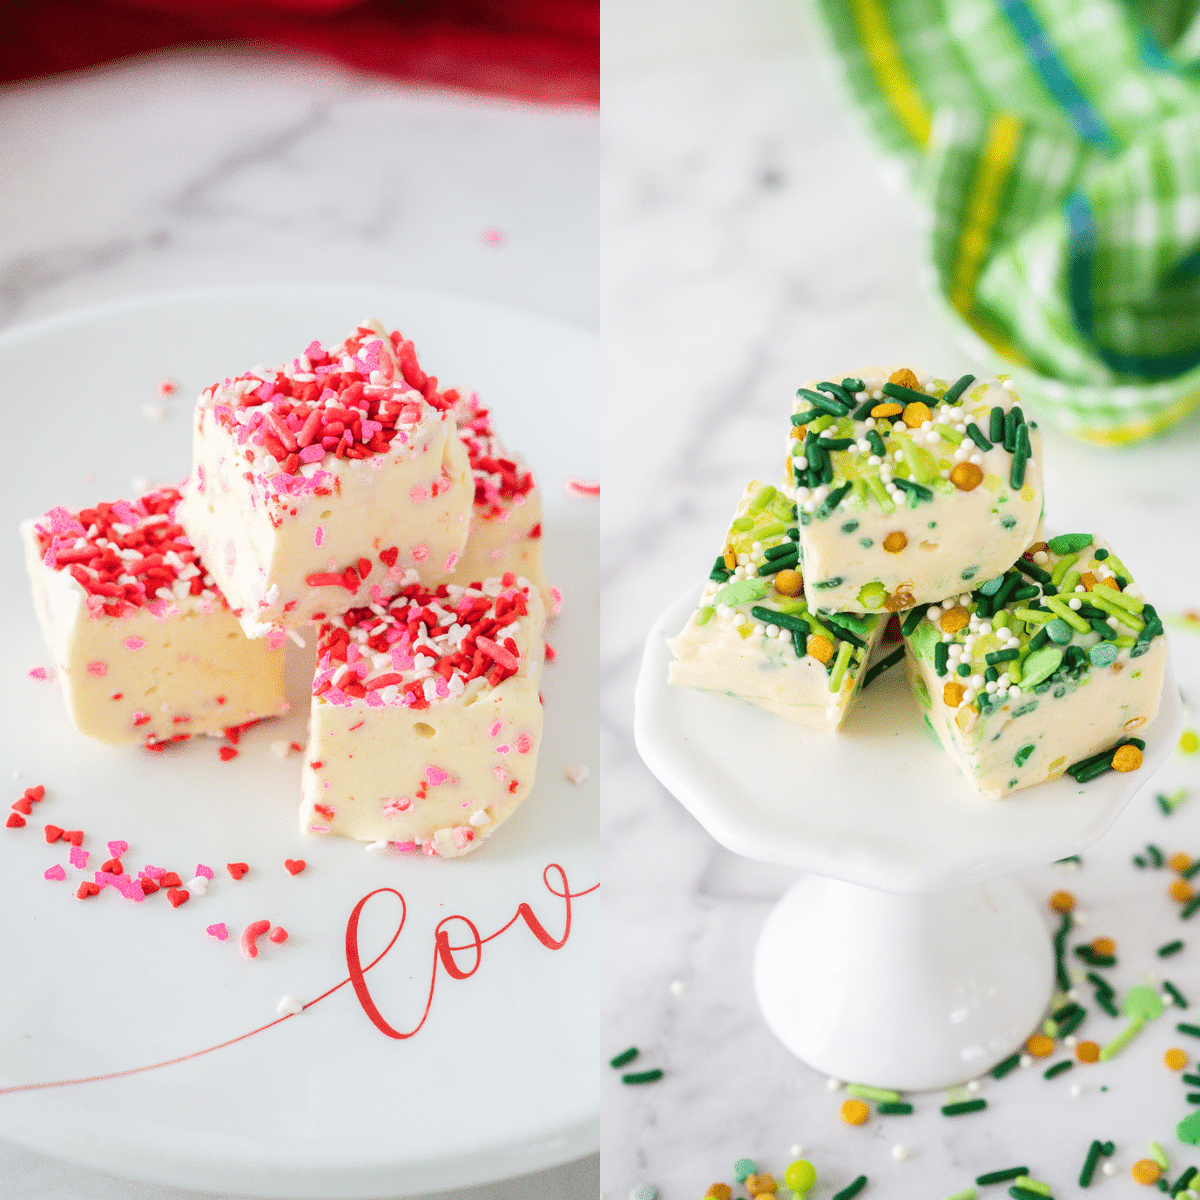 Sugar Cookie Fudge with different sprinkles for Valentine's day and St. Patrick's day.